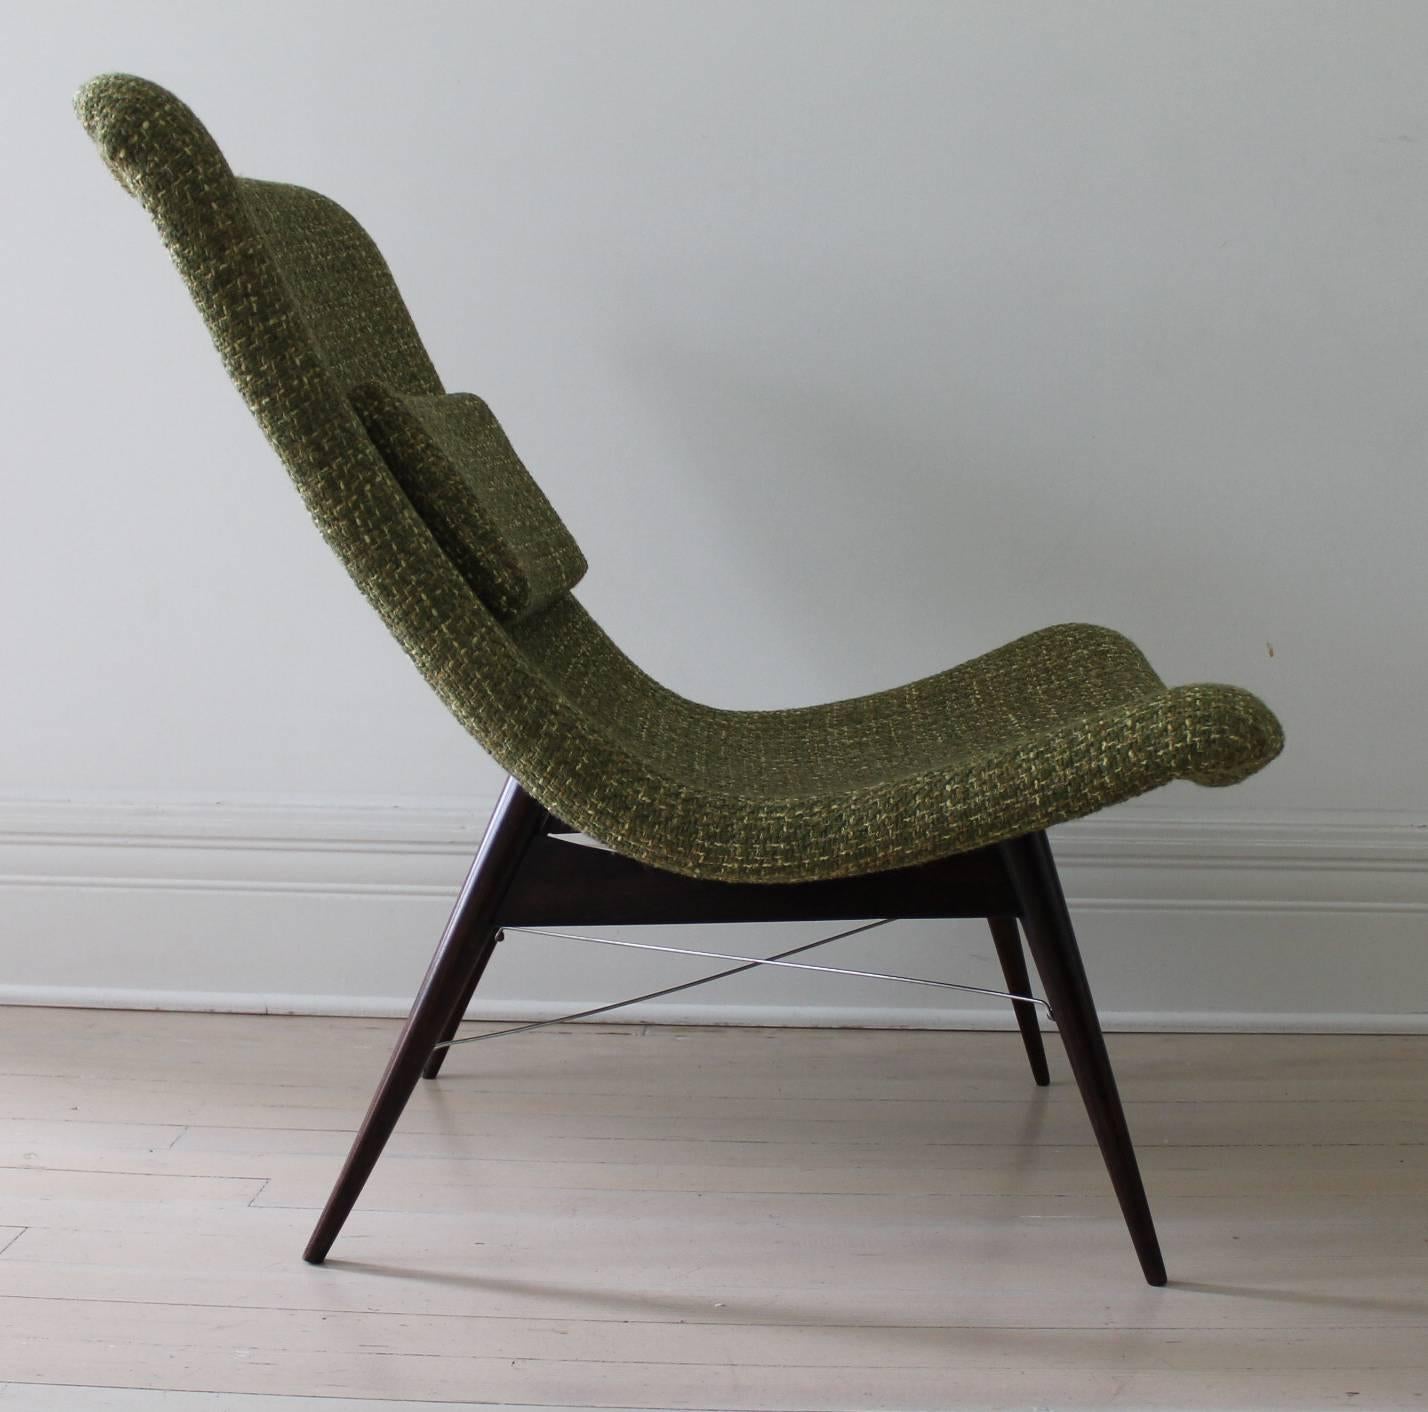 Easy chair by Miroslav Navratil, manufactured in Czech Republic by Cesky Nabytek, 1959. Dark walnut base, light gray fiberglass shell, newly upholstered seat with a fabric from the period. Removable pillow on leather straps.